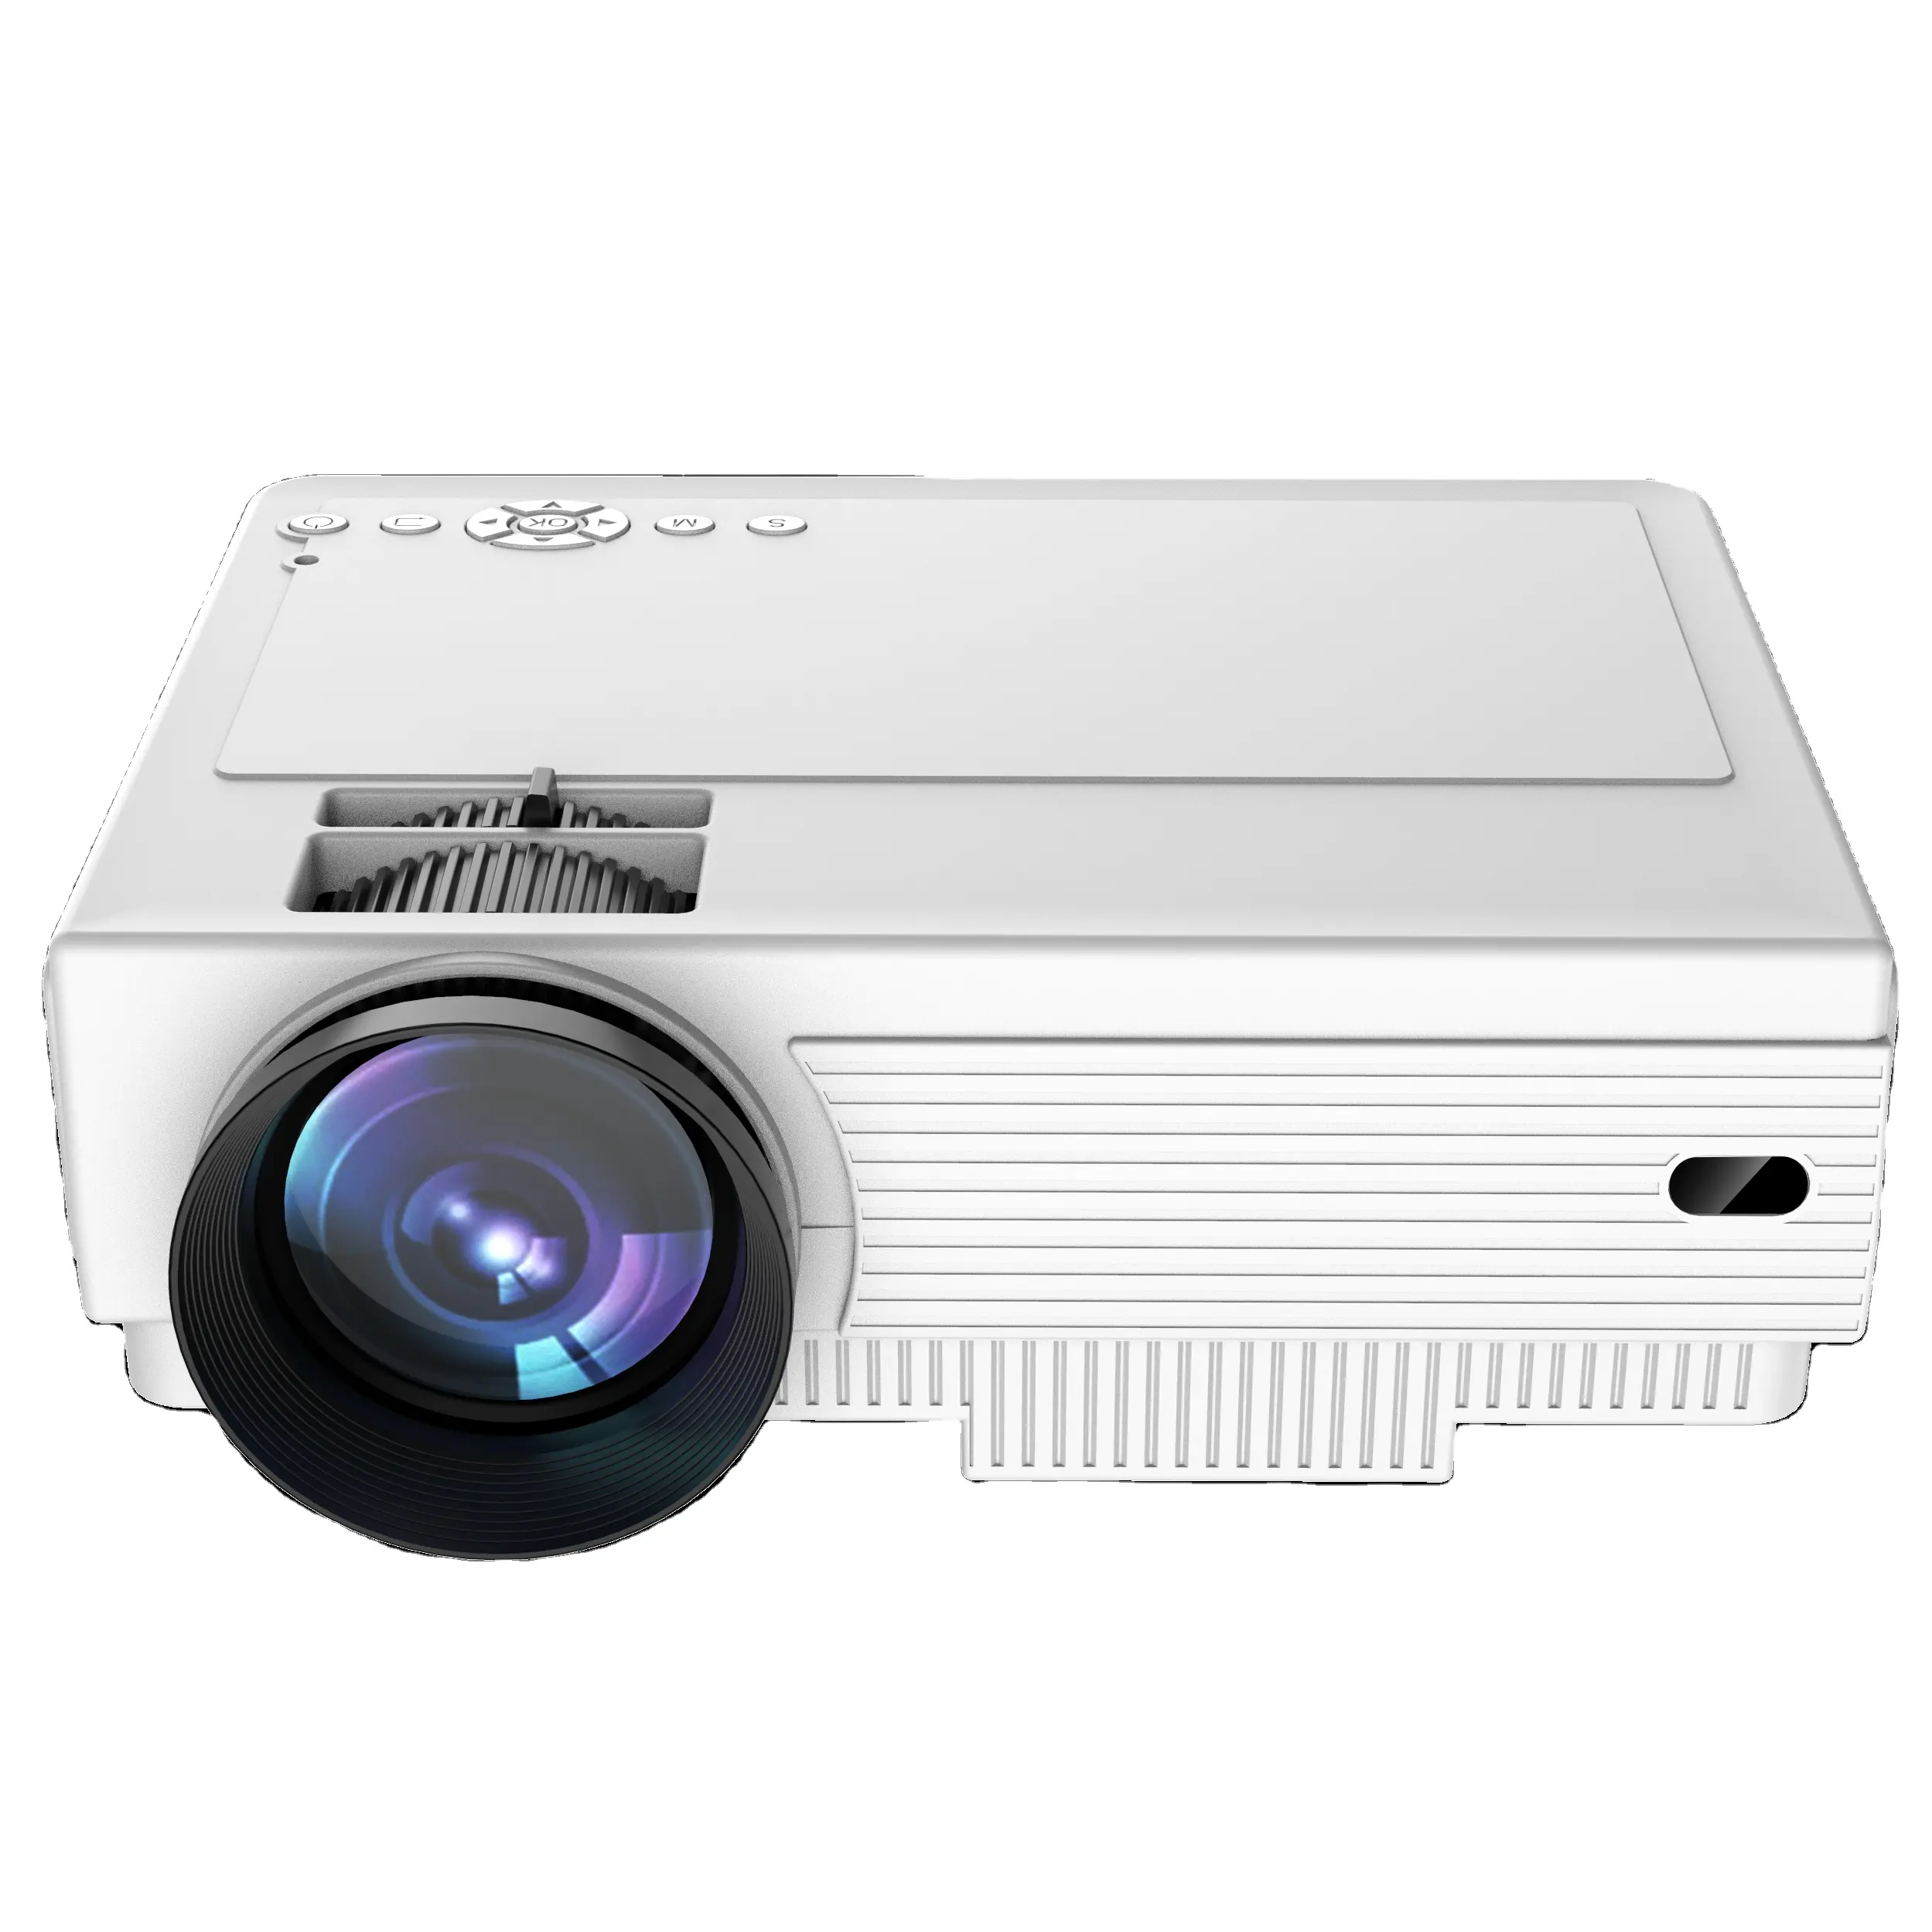 M6 projector 720p high definition portable design smart connection create a private theater white black projector